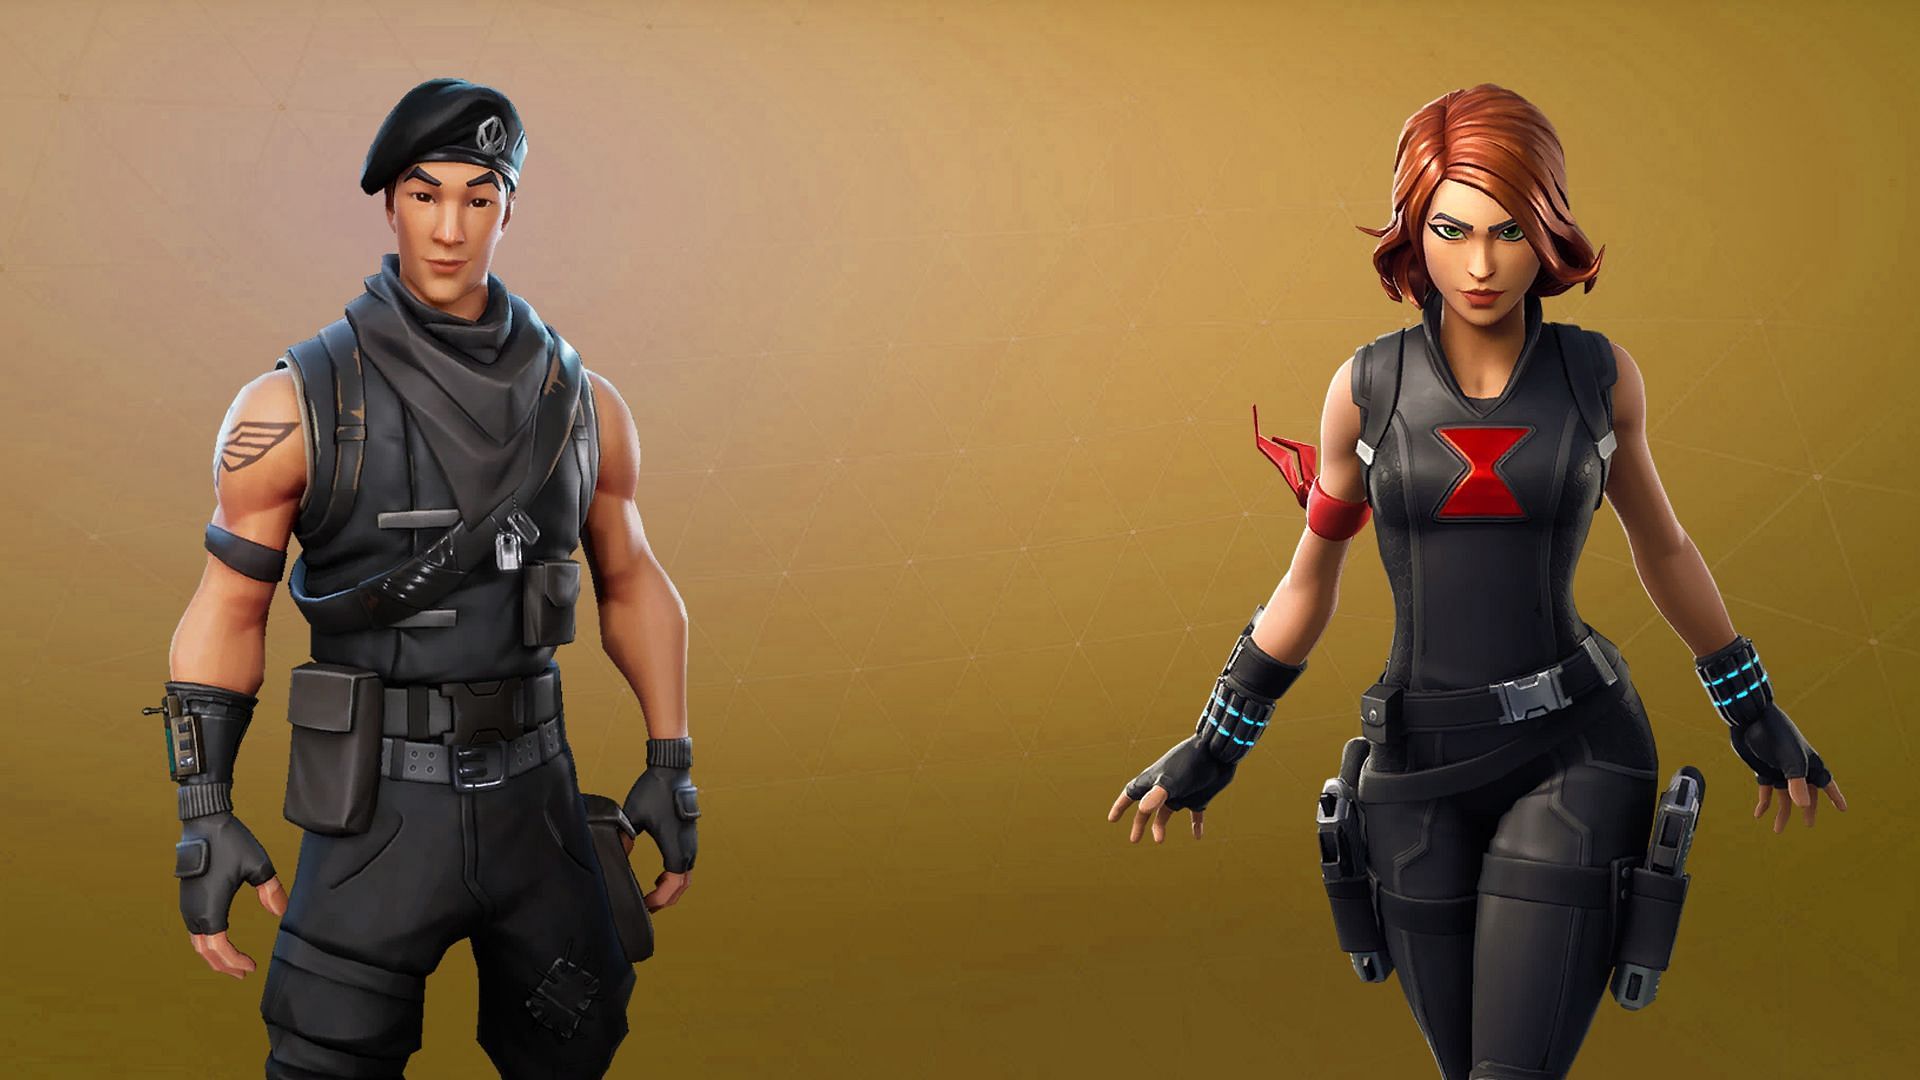 Fortnite Skins: The best and rarest skins in the game